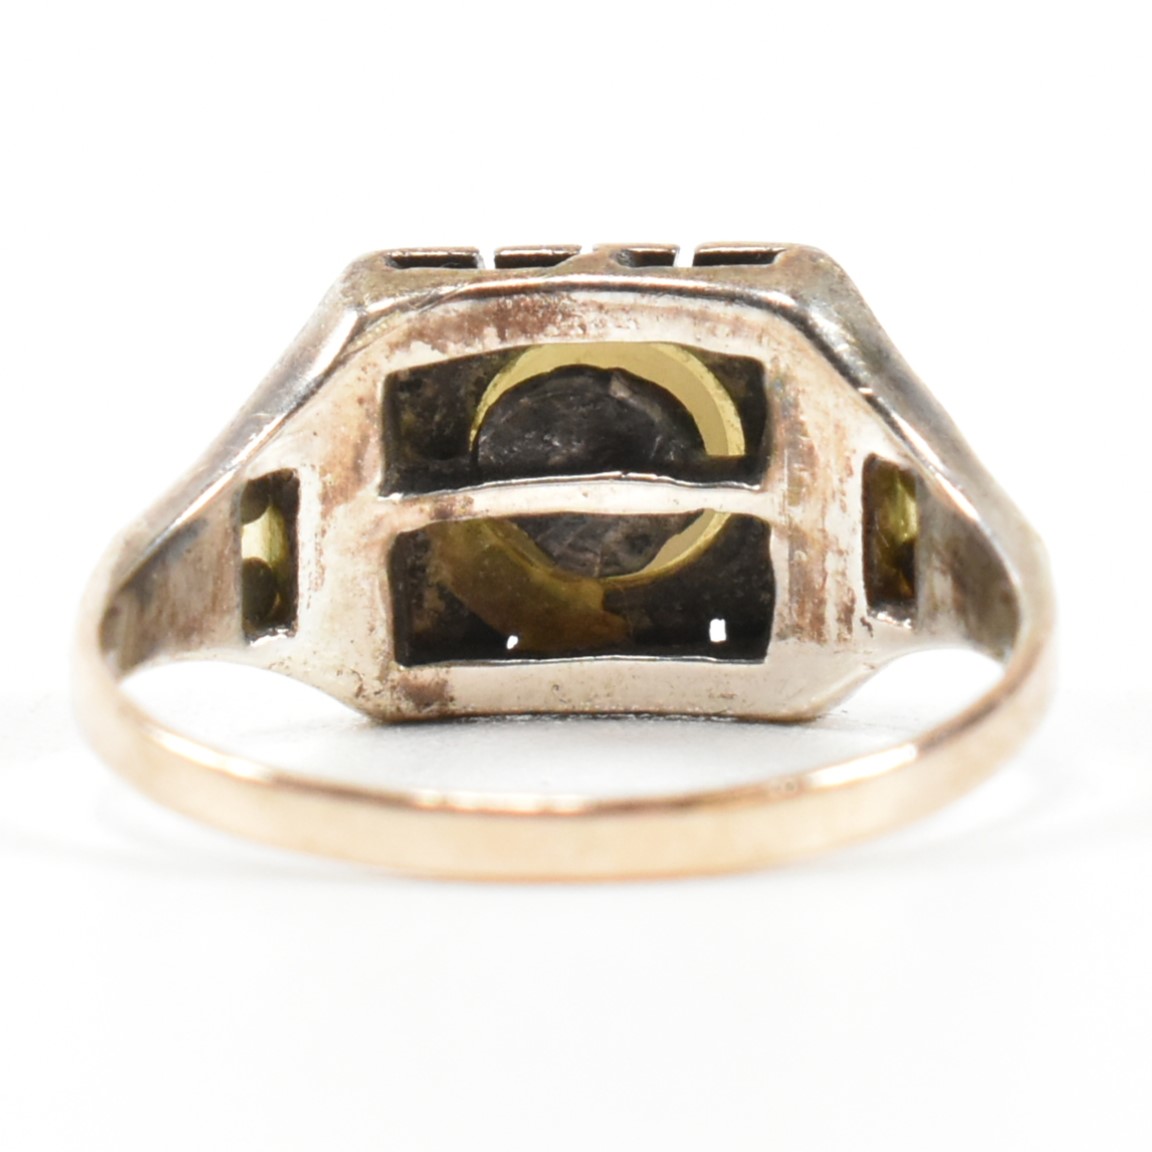 9CT GOLD PEARL & MARCASITE RING - Image 4 of 9